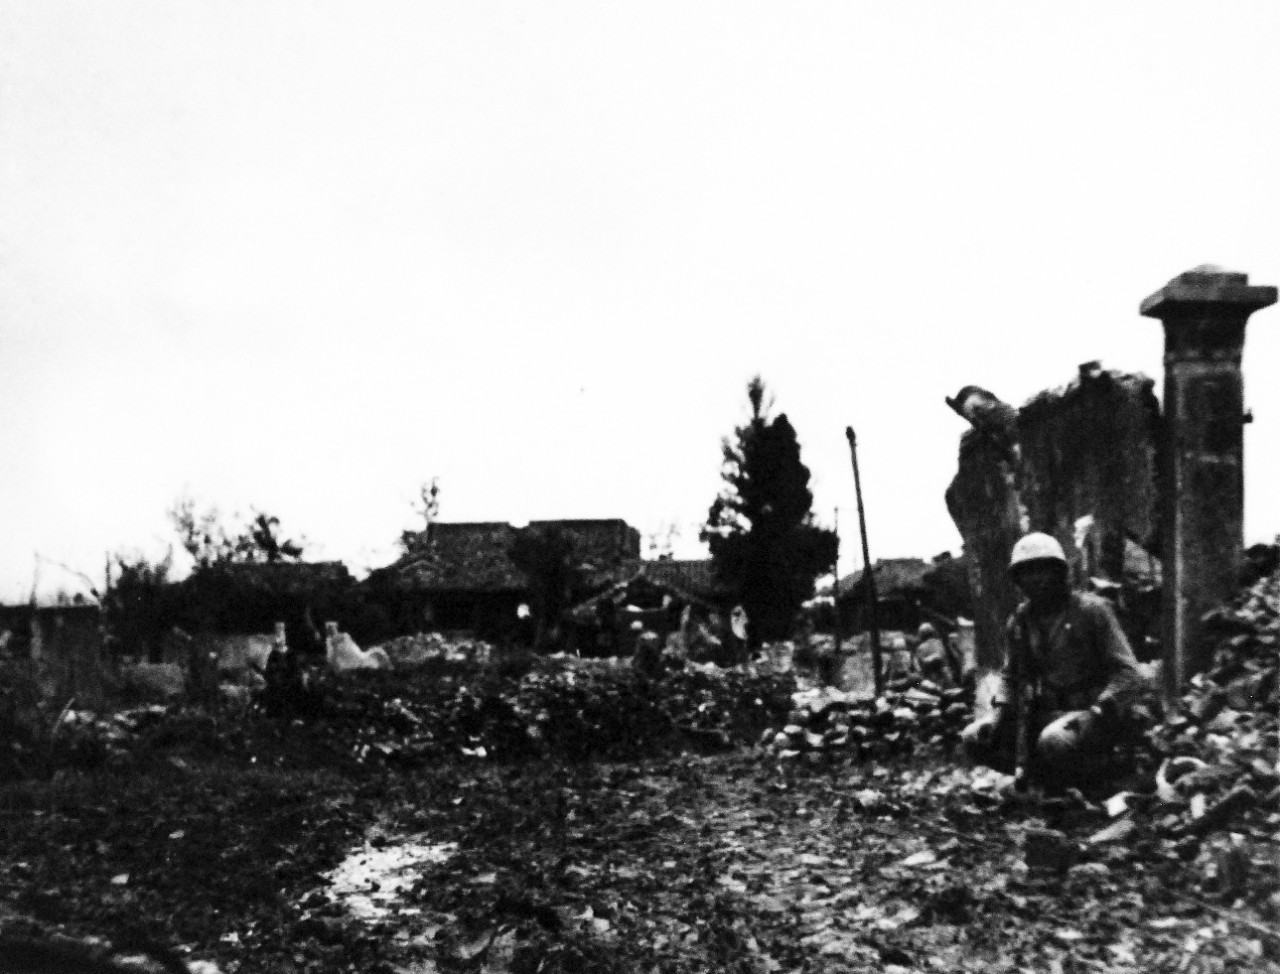 127-GW-518-122300:   Okinawa Campaign, April-June 1945.     Fourth Marines, “L” Company Rifle Squad, lie low and break up while making way near river bank at Naha, Okinawa, 24-26 May 1945.  At time photograph was taken Japanese were putting everything they had at the Marines.  Note, large explosions in Naha made by our planes and heavy artillery.   Official U.S. Navy Photograph, now in the collections of the National Archives.   (2014/6/25).